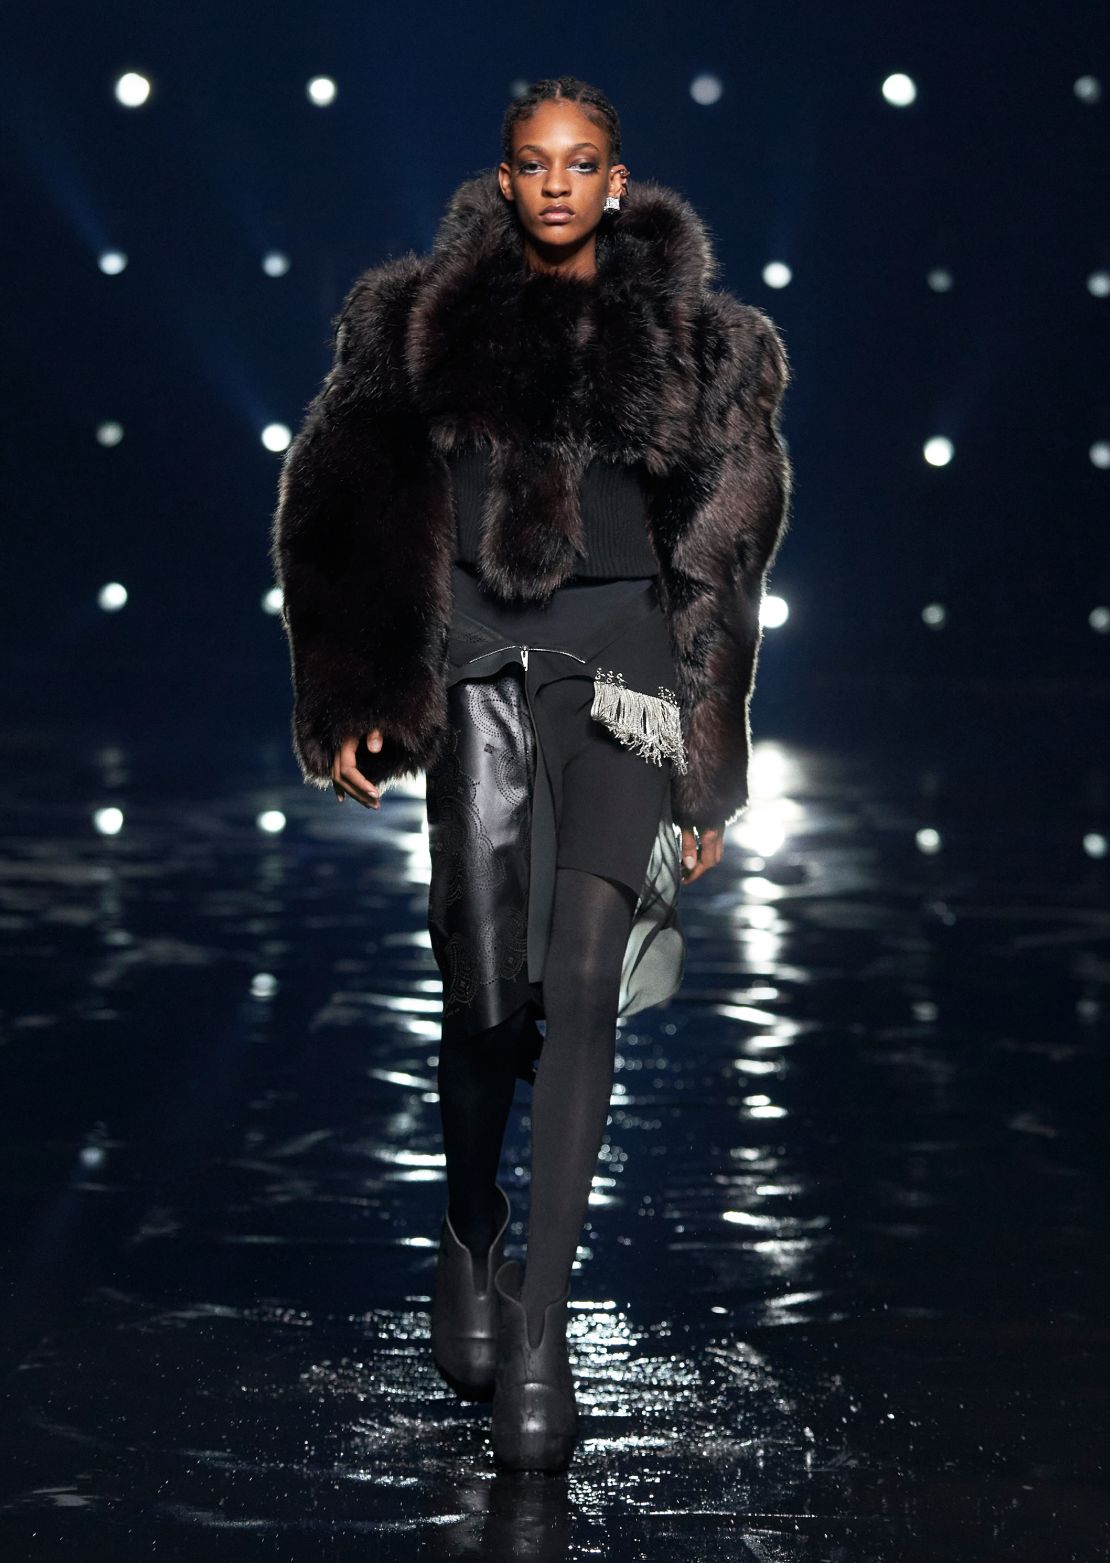 The collection "is a mix of lavishness and austerity," Givenchy said in a press statement.